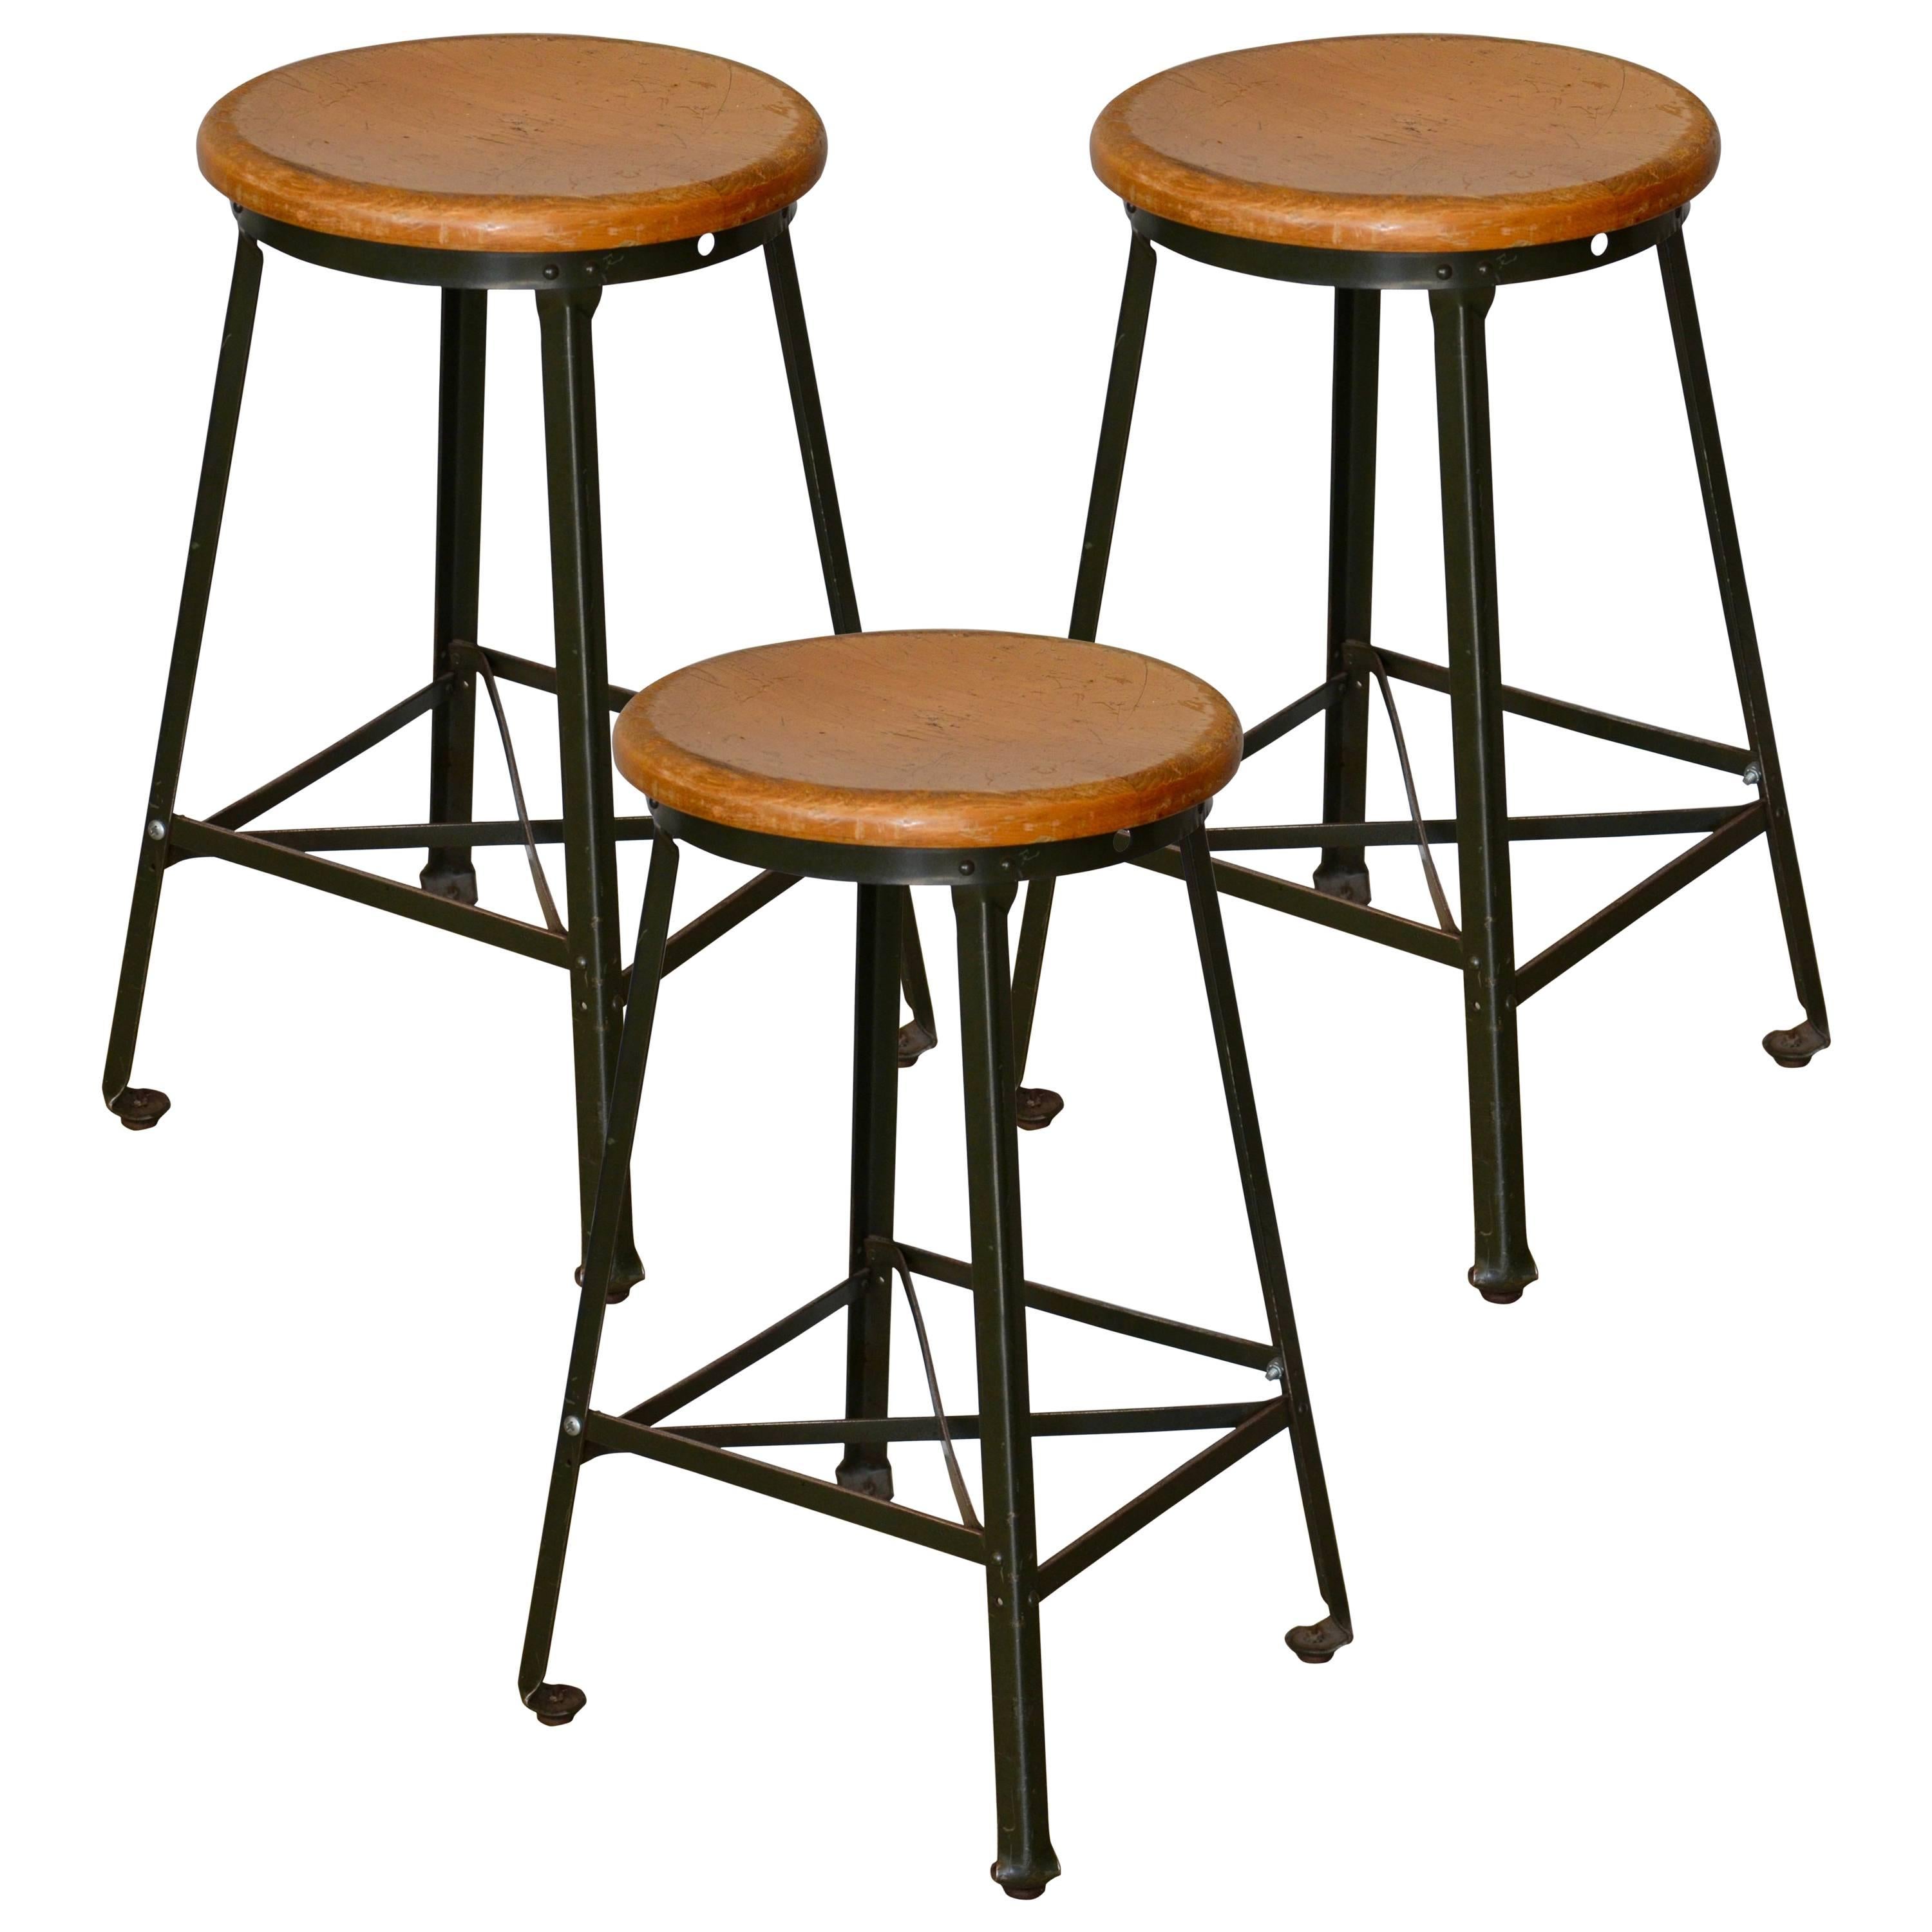 Great Set of Three Vintage Industrial Steel and Turned Wood Counter Stools